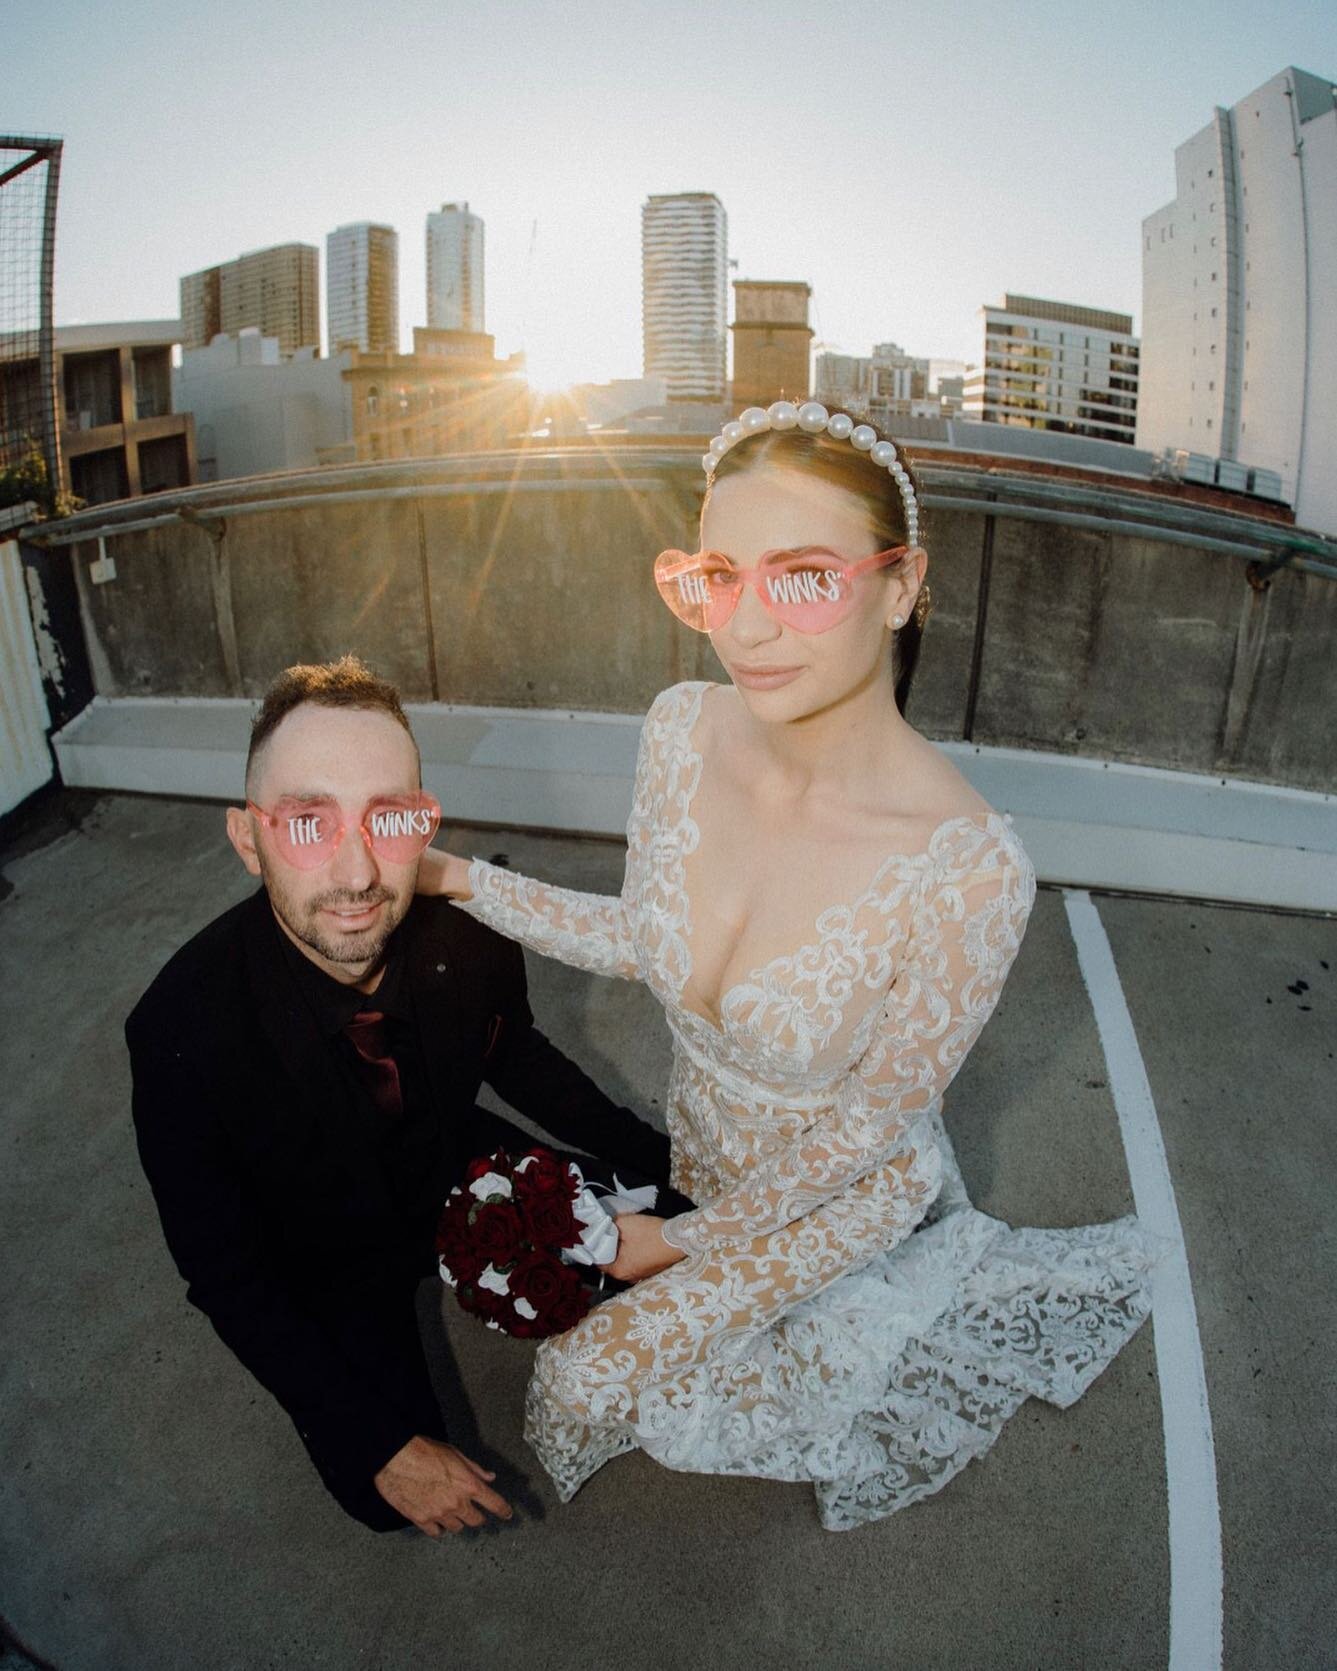 .

&bull; Meet the Winks &bull;

Maddy + Morgan made it all officially official in their absolute fun, jovial kinda way.

Maddy walked the aisle to Lana Del Rey&rsquo;s epic song, Video Games and as they exited as a newly married couple Kanye belted 